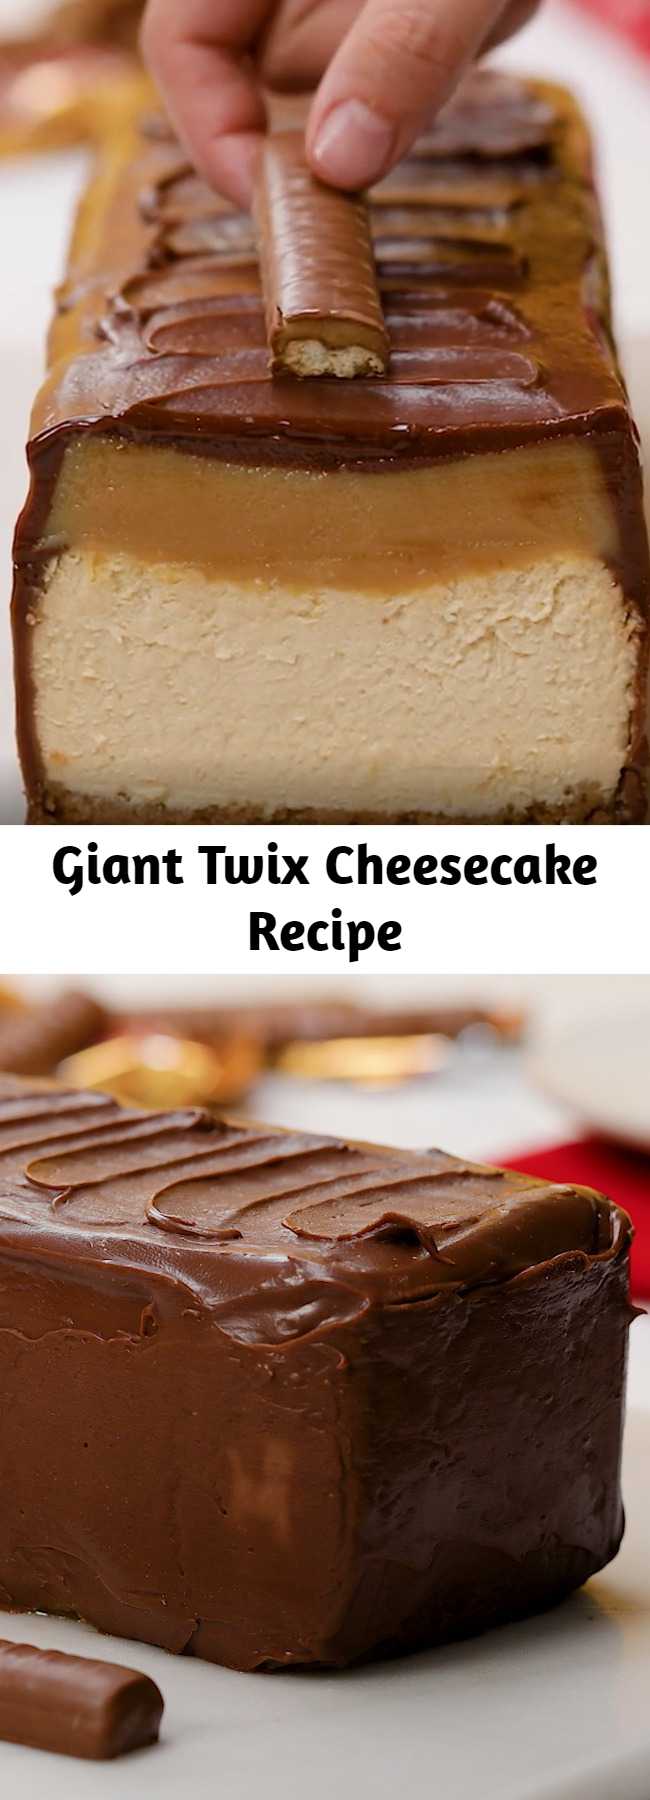 Giant Twix Cheesecake Recipe - We're not playing twix, this thing is HUGE.